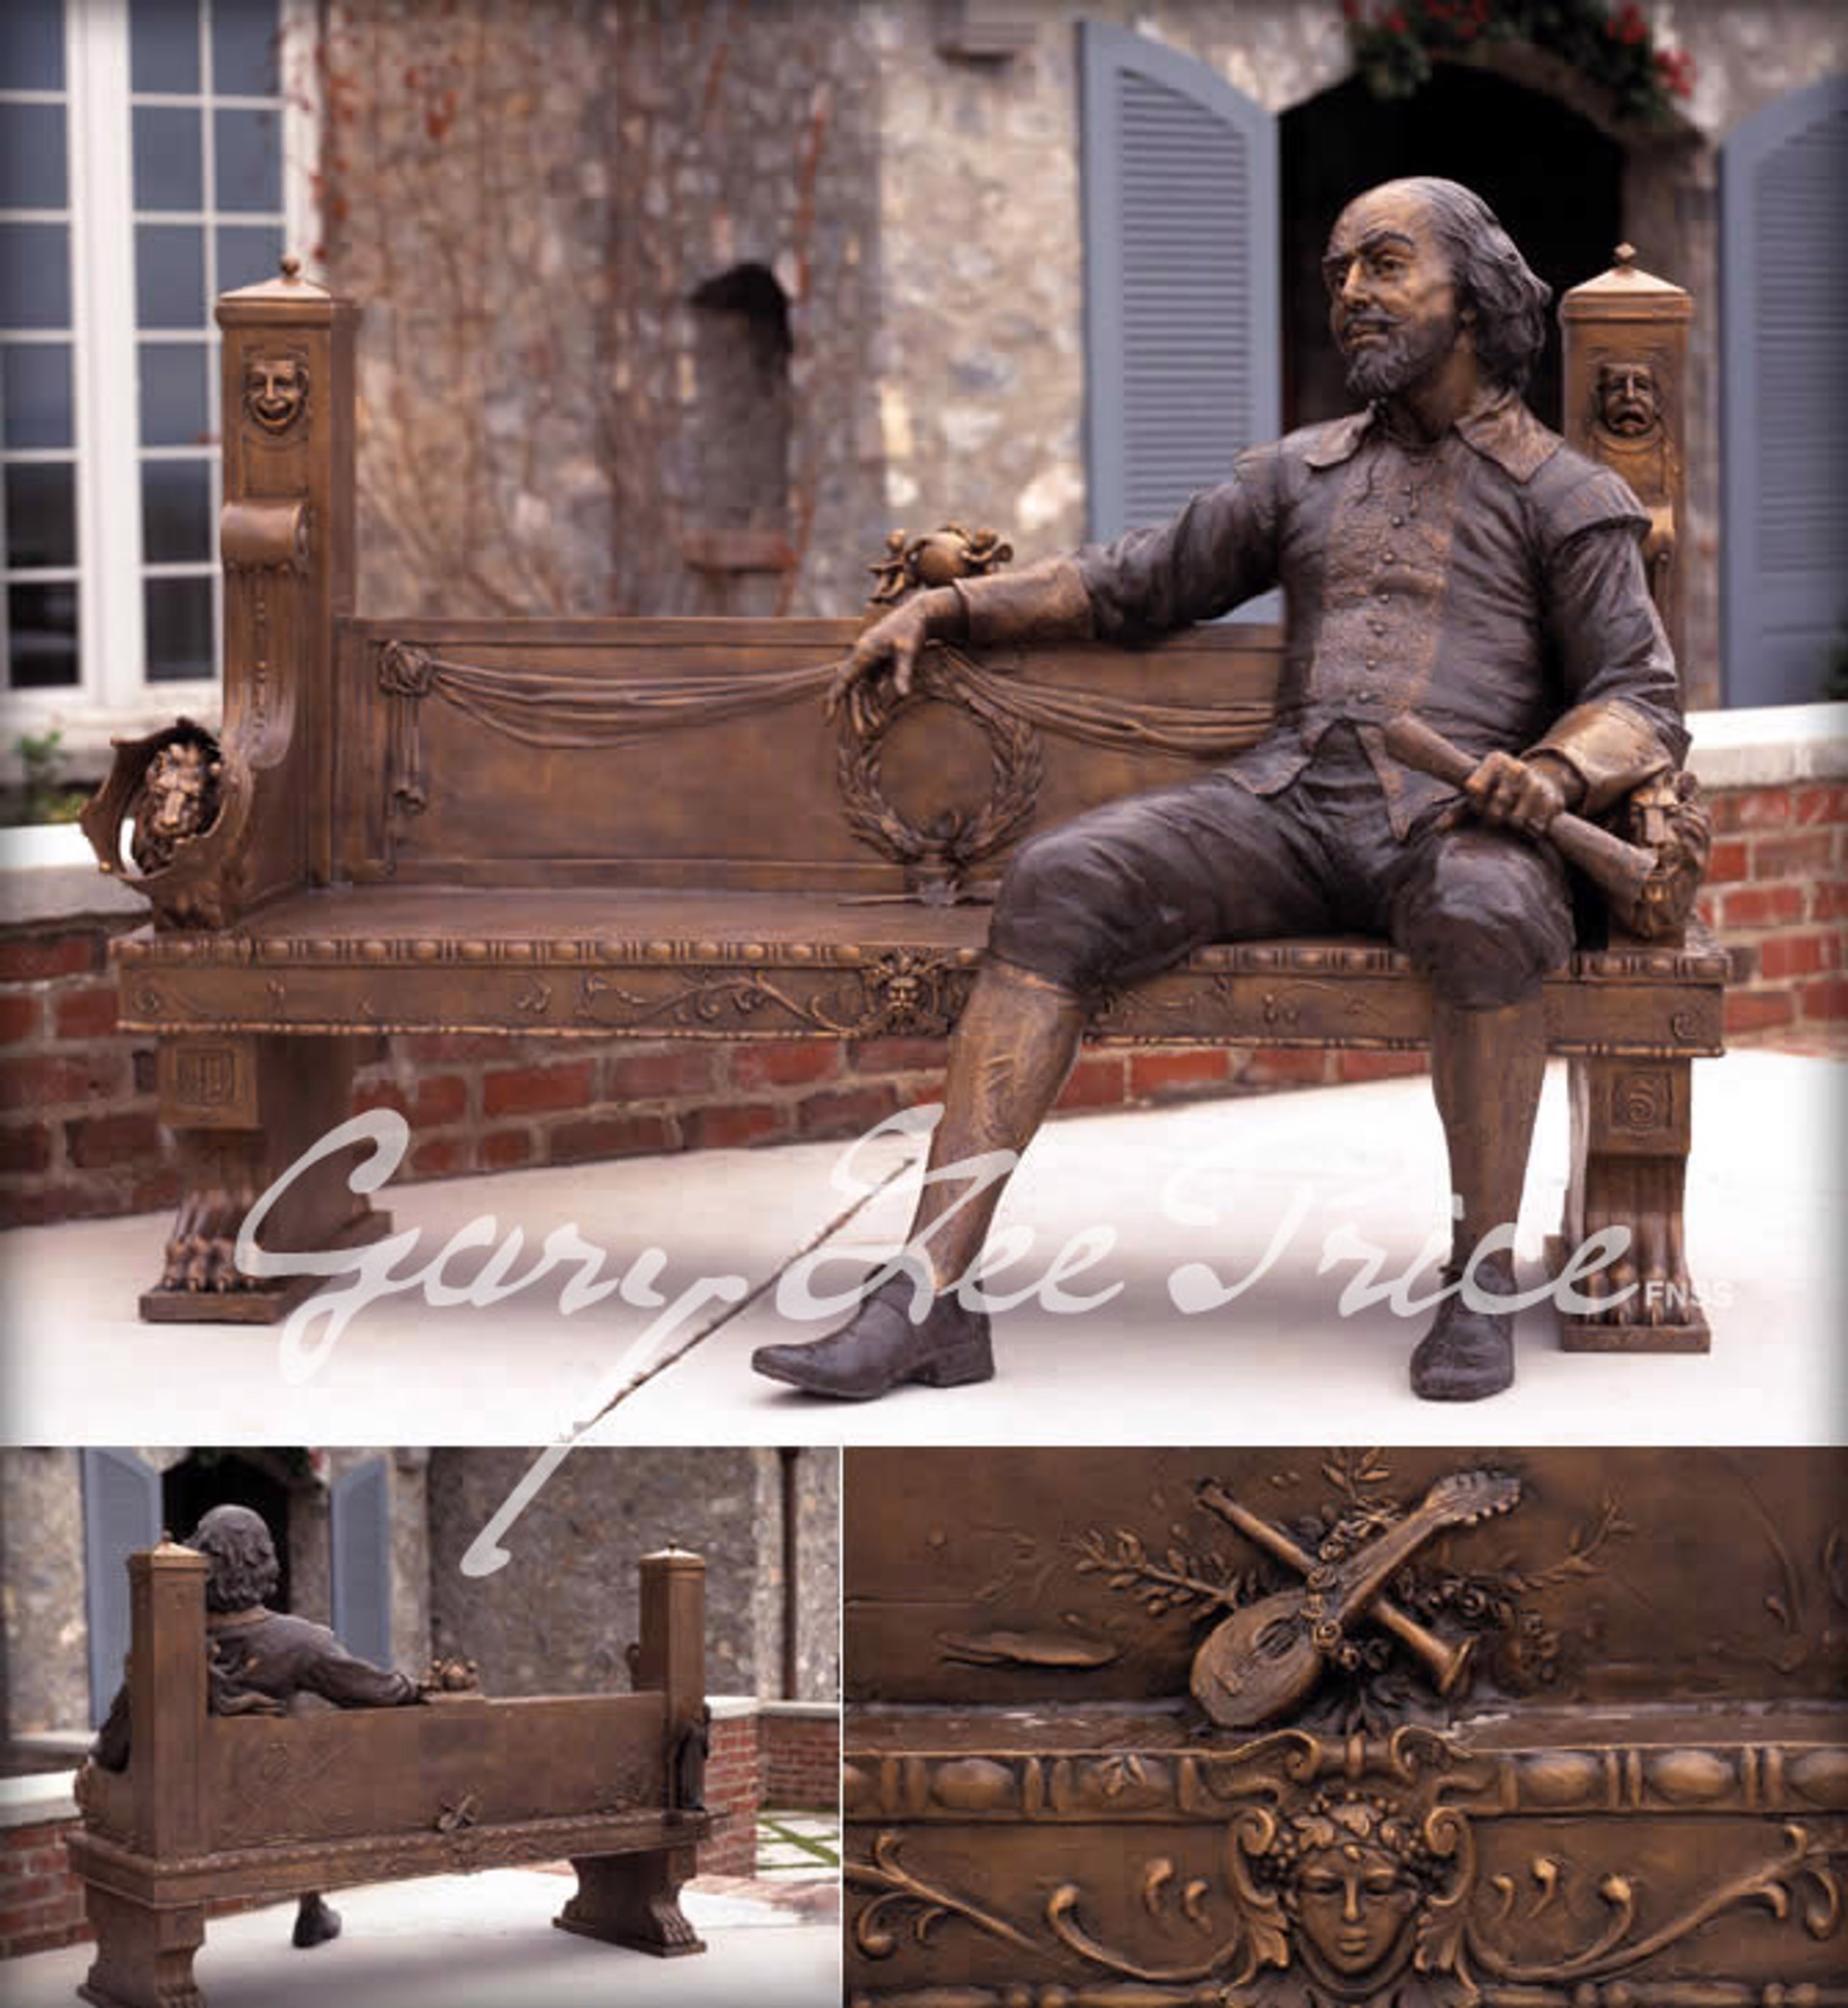 Shakespeare Bench by Gary Lee Price (sculptor)